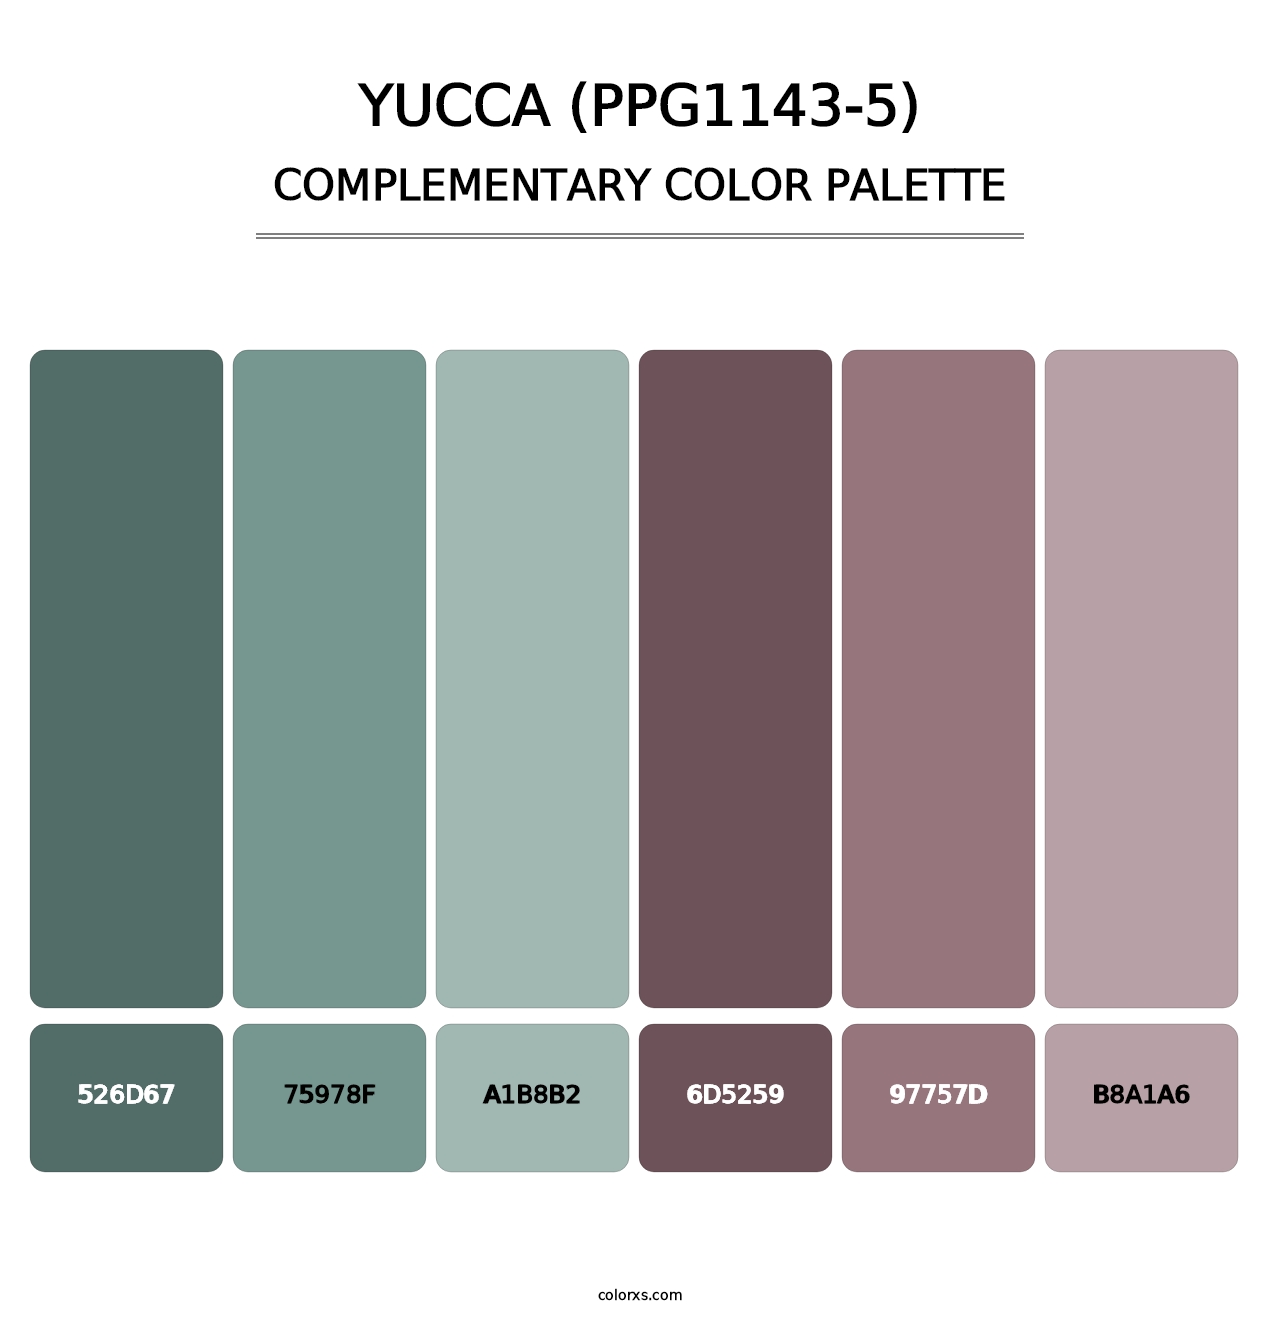 Yucca (PPG1143-5) - Complementary Color Palette